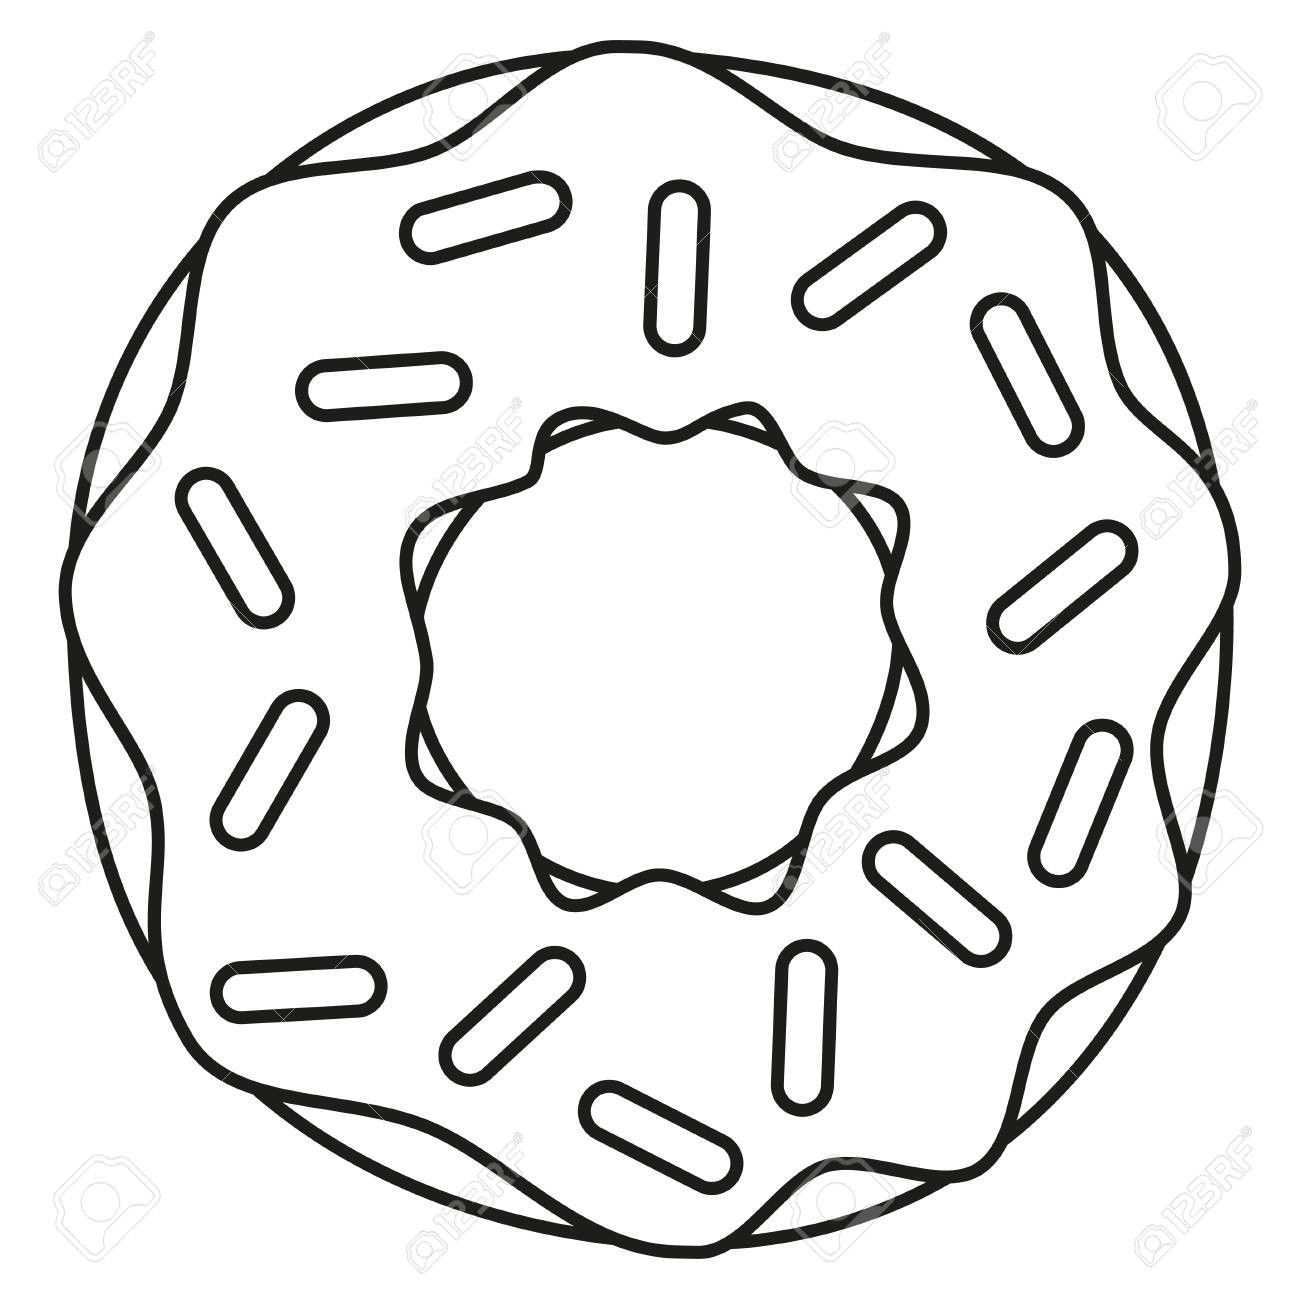 21 Inspired Photo Of Donut Coloring Page Entitlementtrap Com Donut Coloring Page Donu